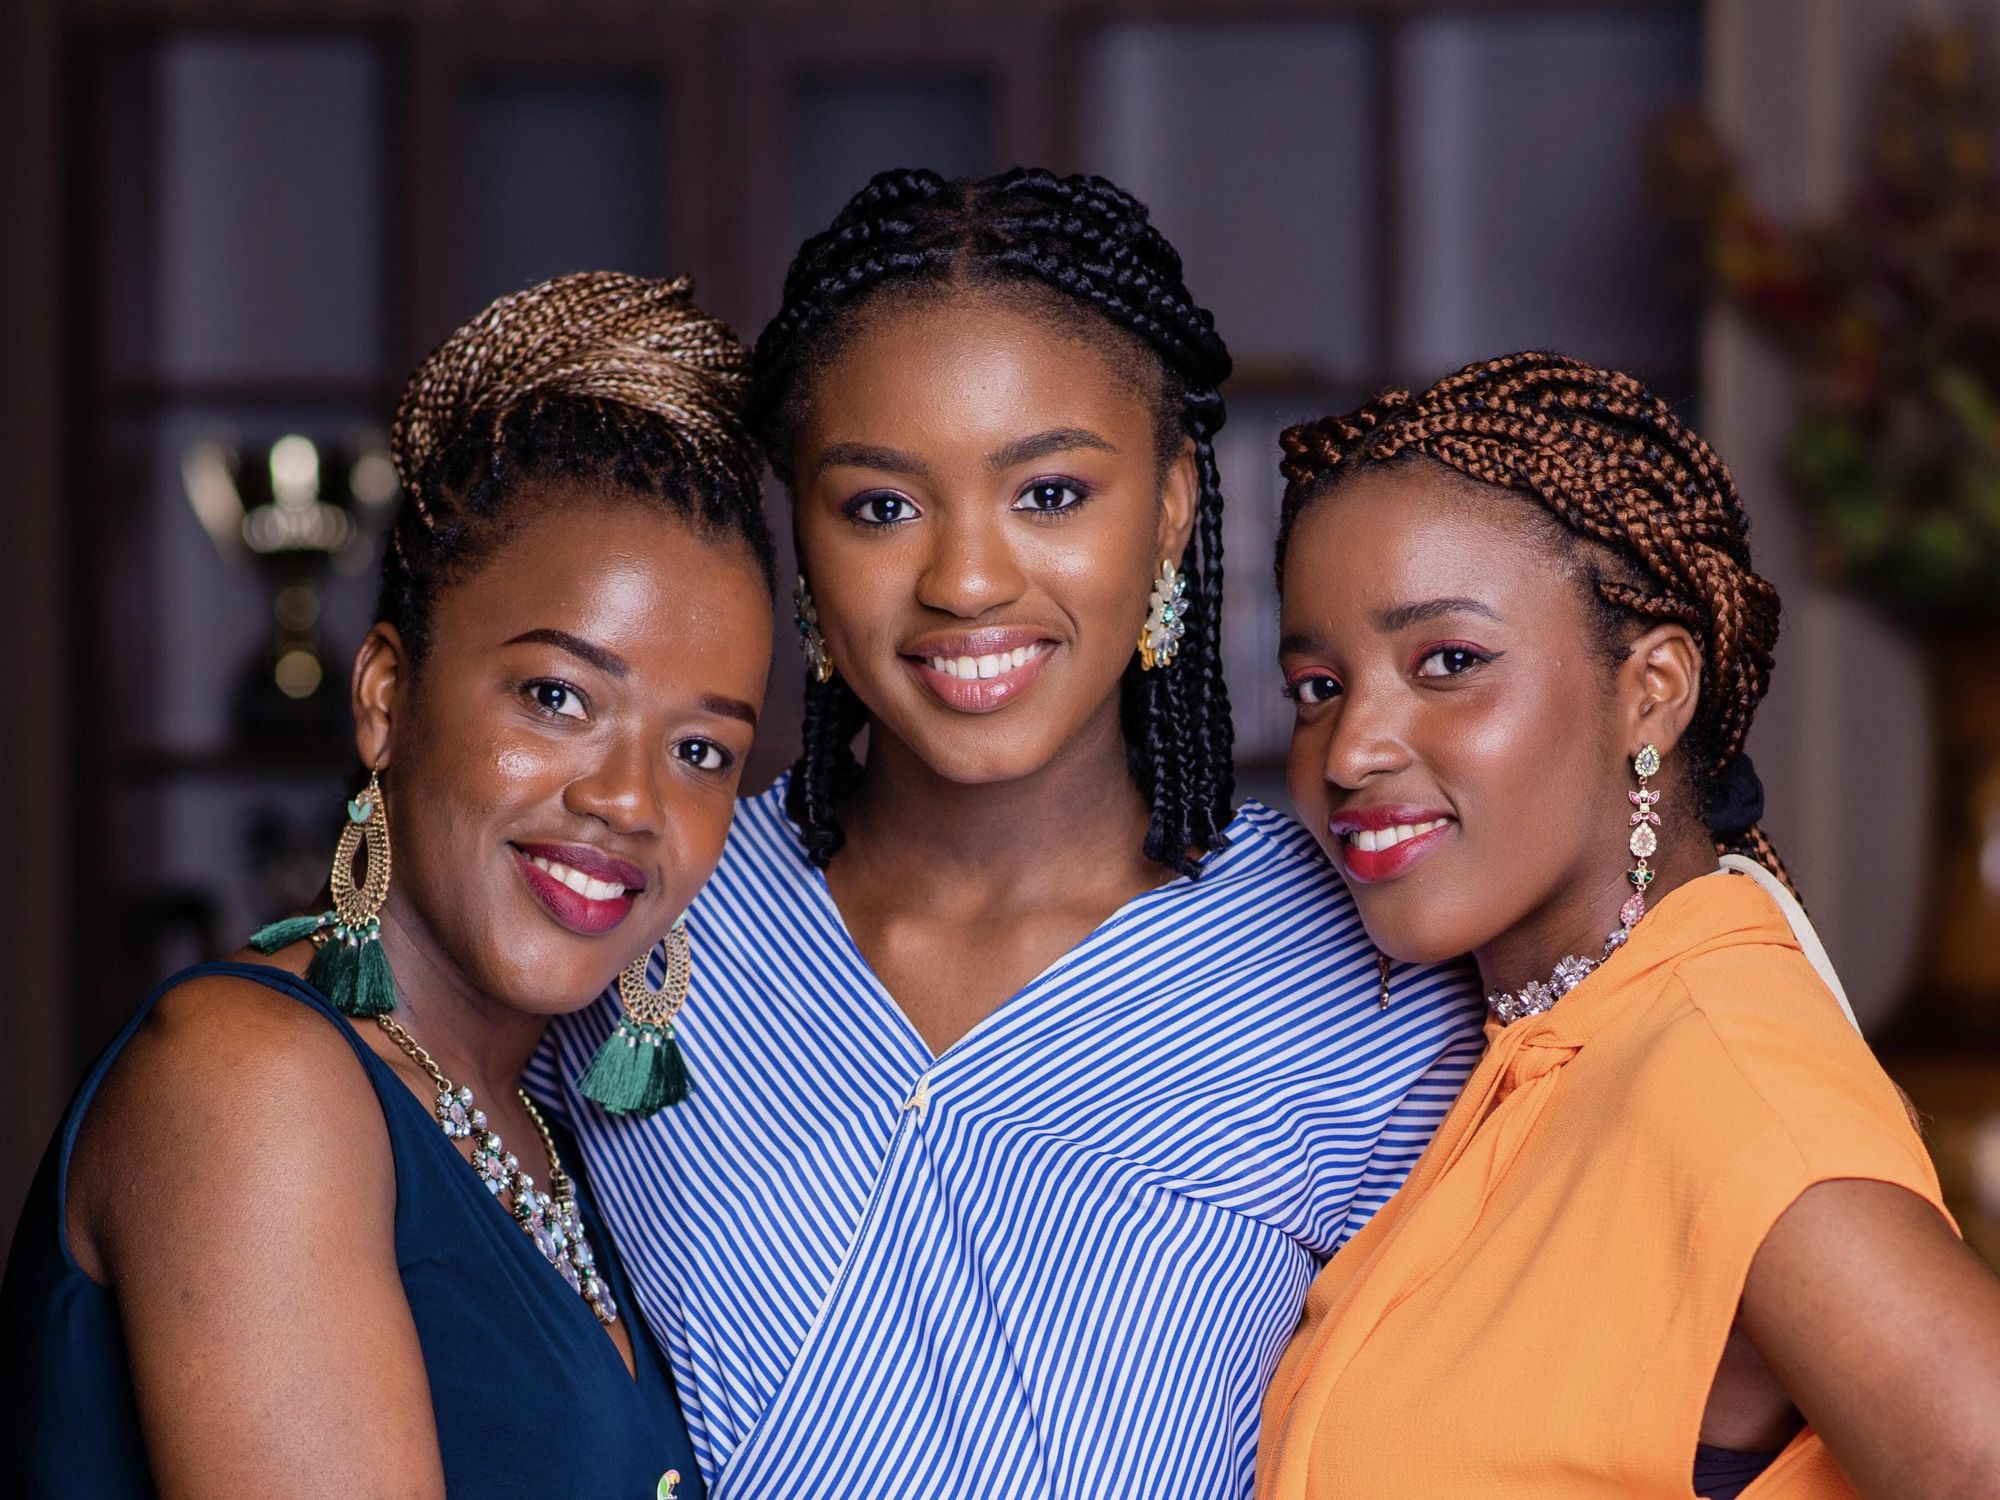 These Sisters Are Reimagining Nollywood For A Younger Audience